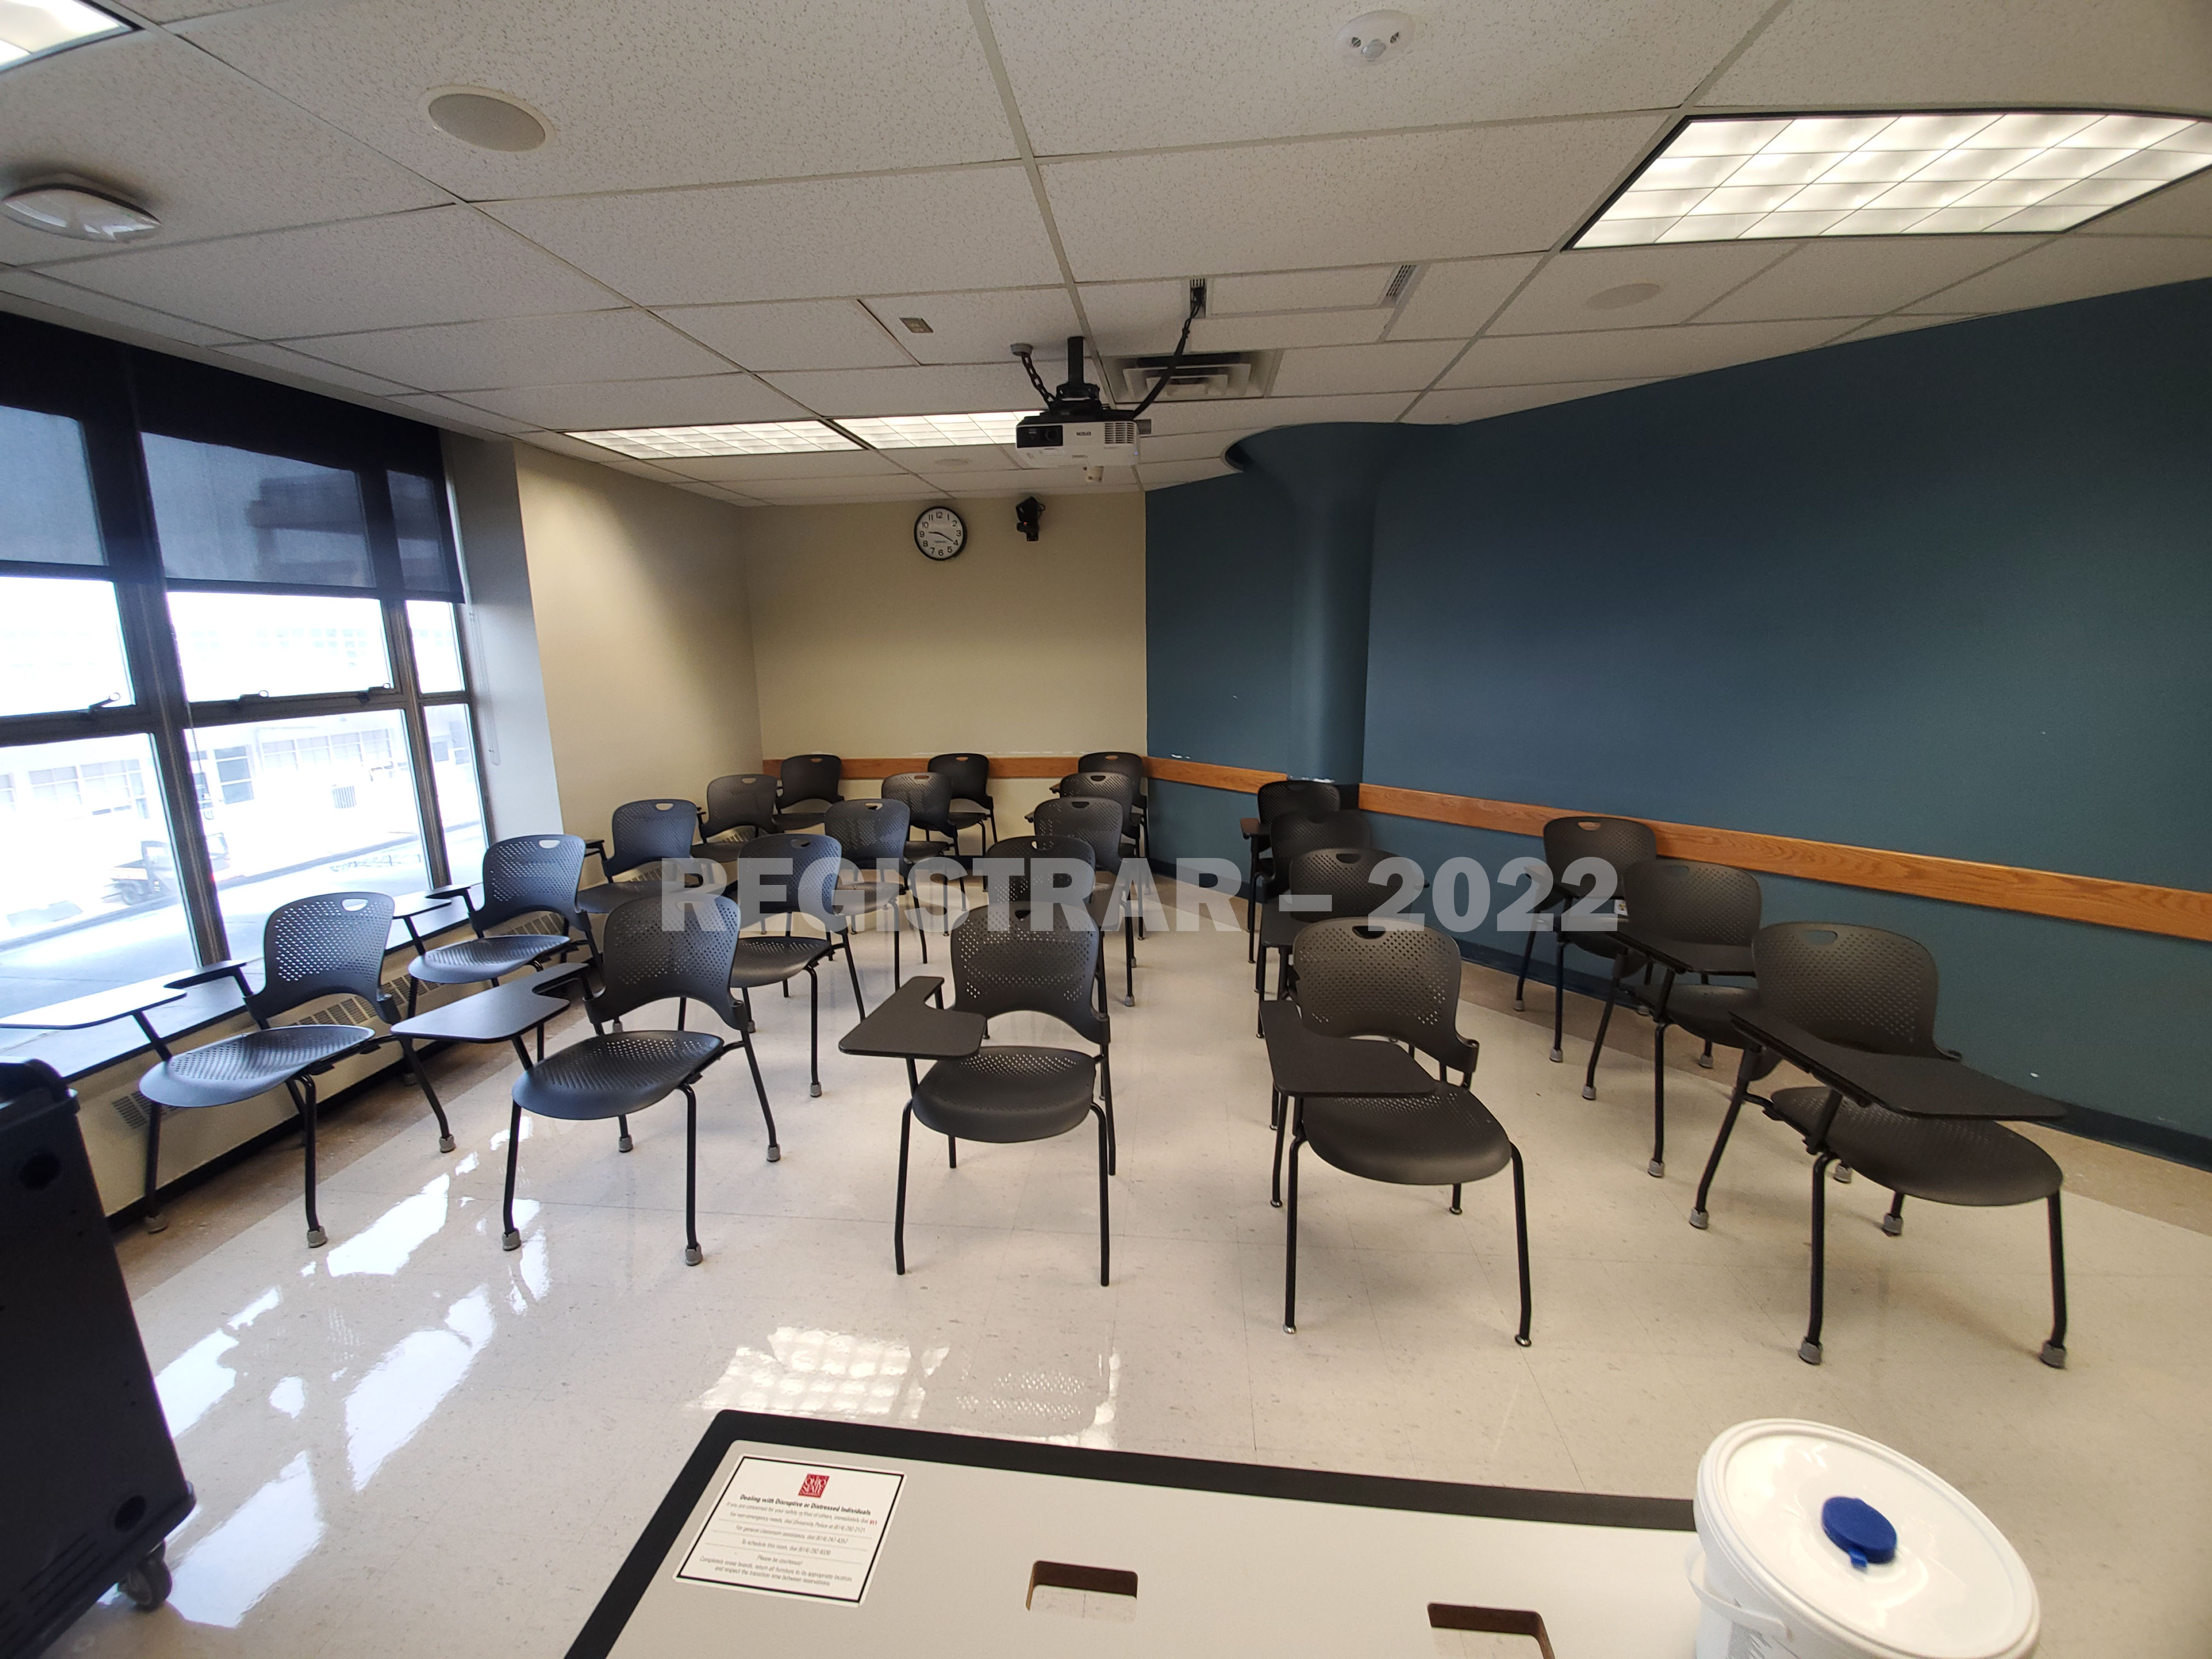 Enarson Classroom Building room 238 ultra wide angle view from the front of the room